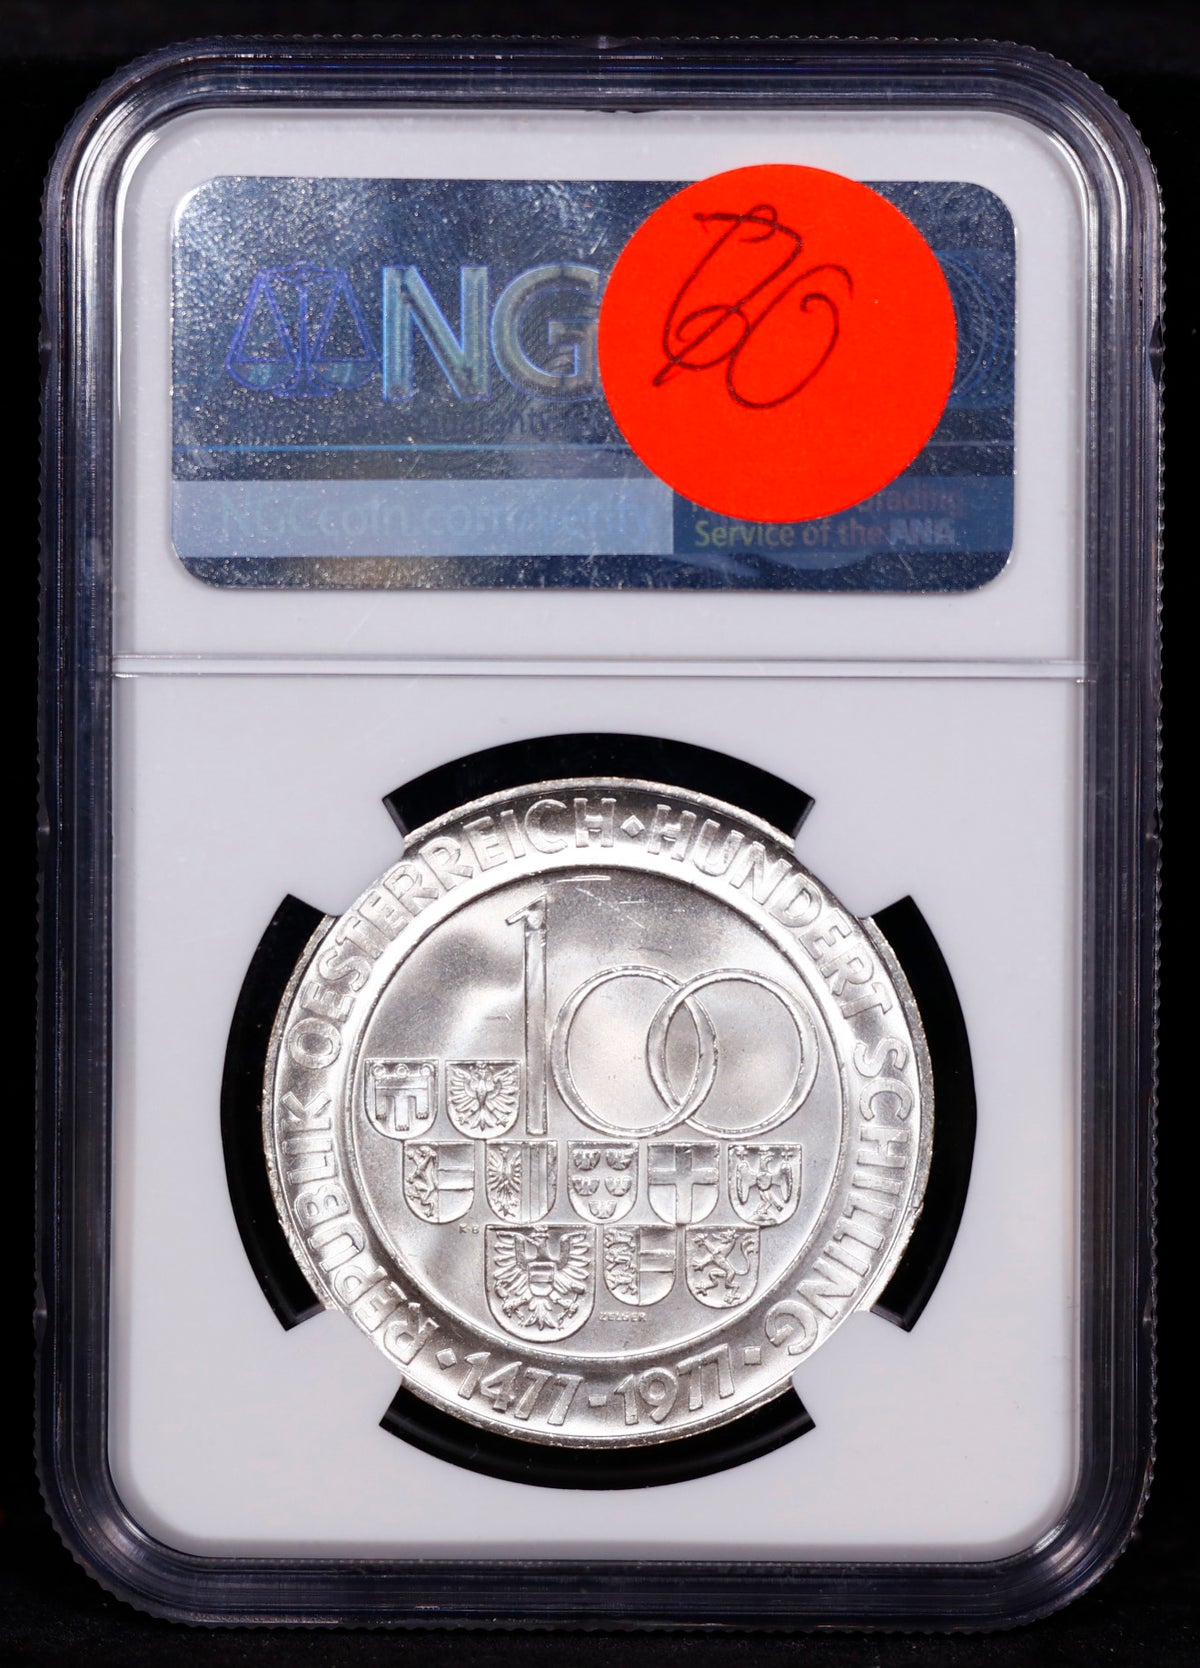 1977 Austria S100S Hall Mint Anniversary NGC MS66 2nd Finest Known